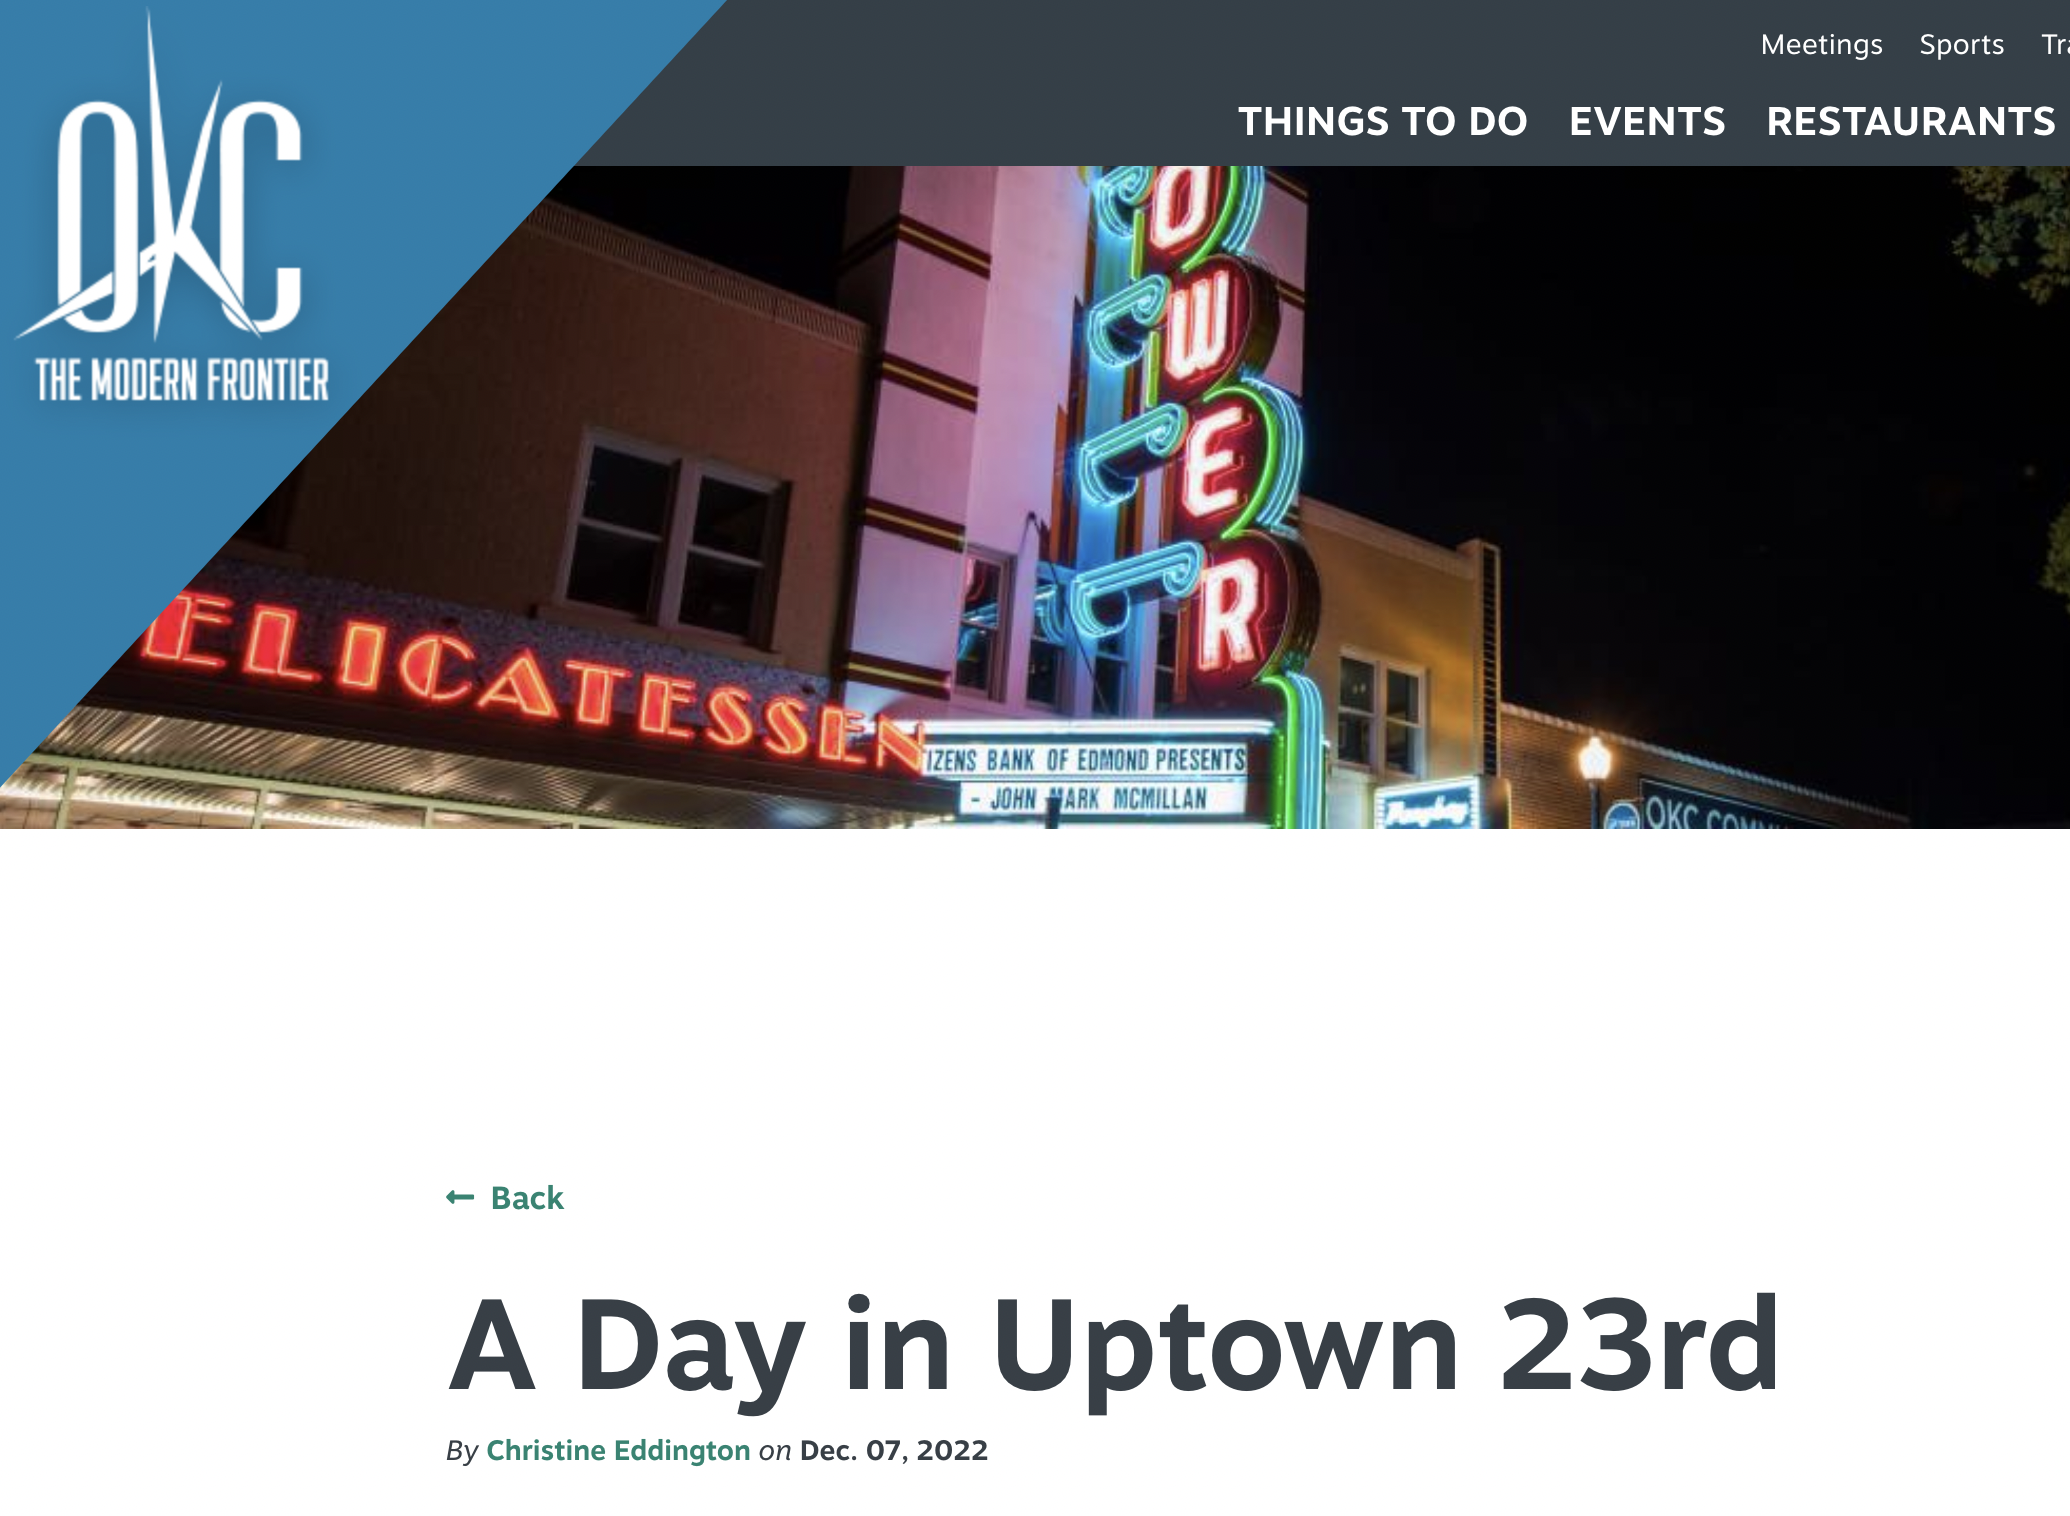 Visit OKC's Spend A Day in Uptown